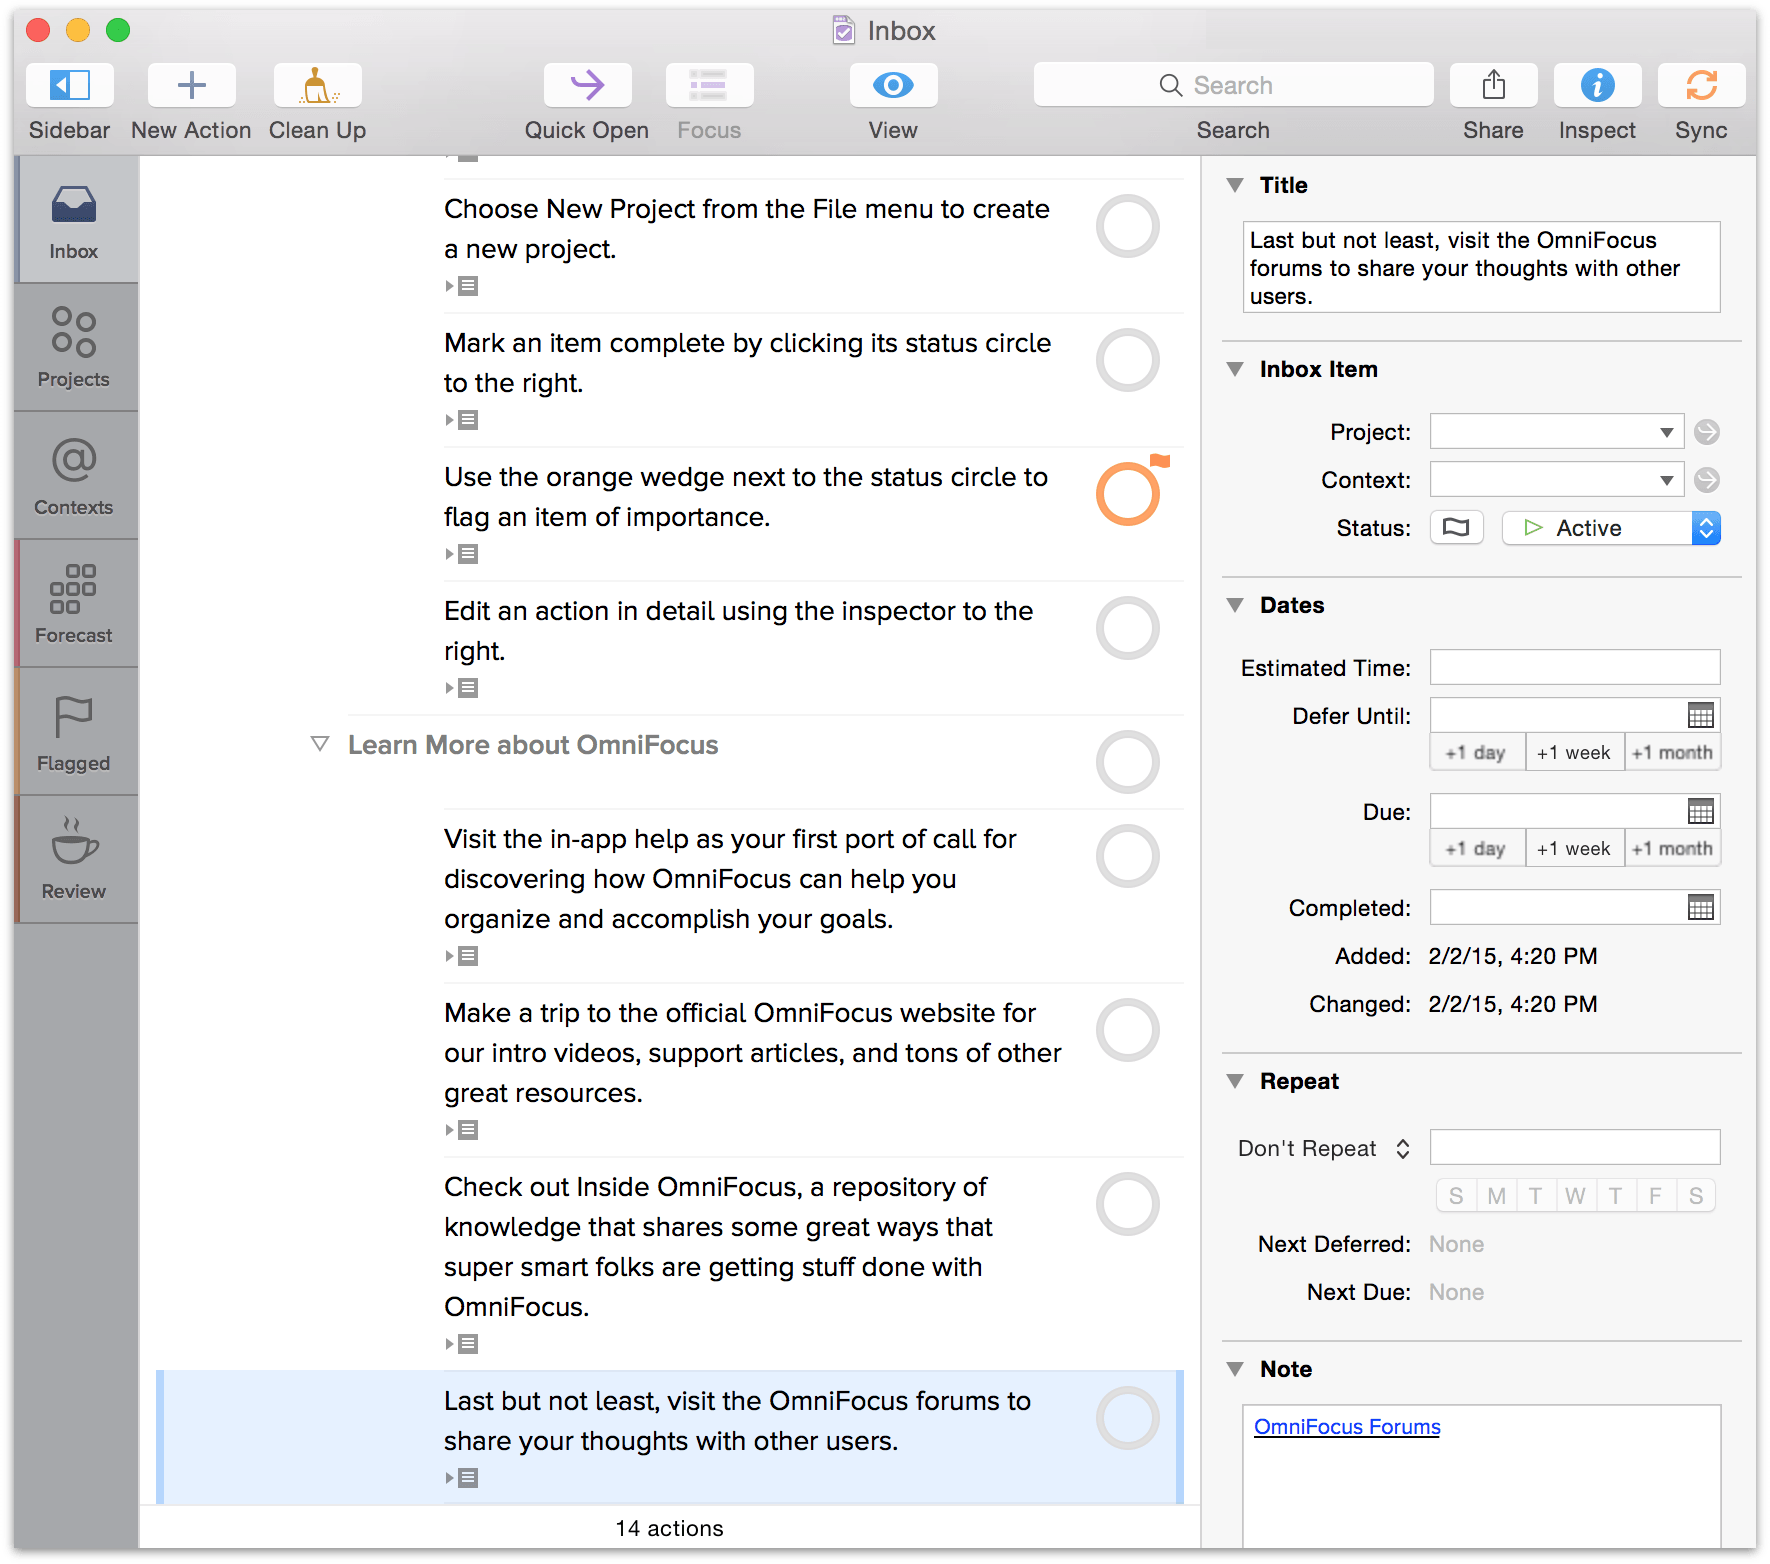 Actions can be edited in the main outline, or using the Inspector (at right)